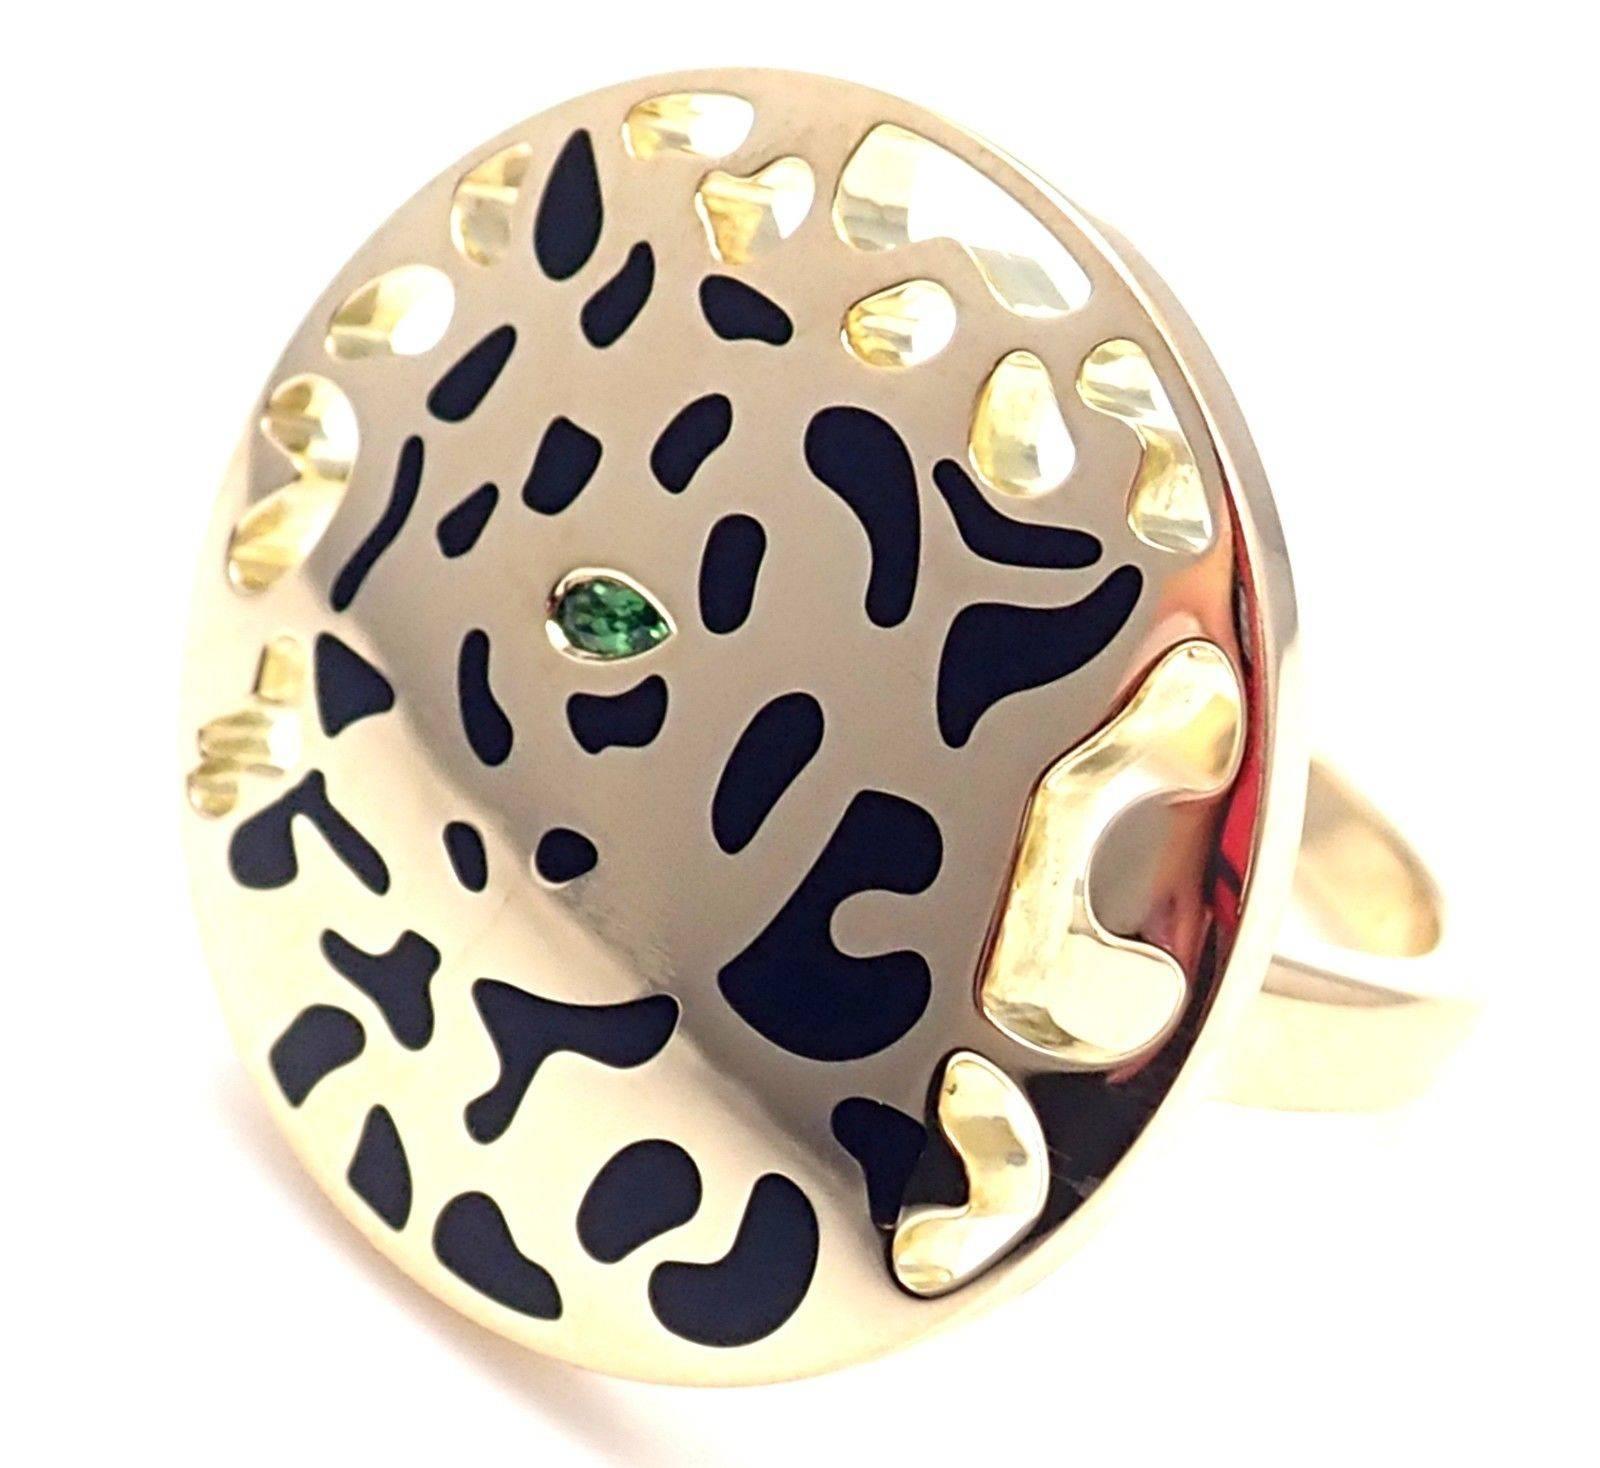 18k Yellow Gold Panther Panthere Lacquer Tsavorite Garnet Ring by Cartier. 
With 1 small Tsavorite garnet.
Details:
Size: European 54, US 6 3/4
Width: 23.5mm
Weight: 16.3 grams
Stamped Hallmarks: Cartier 750 54 QS2165
*Free Shipping within the